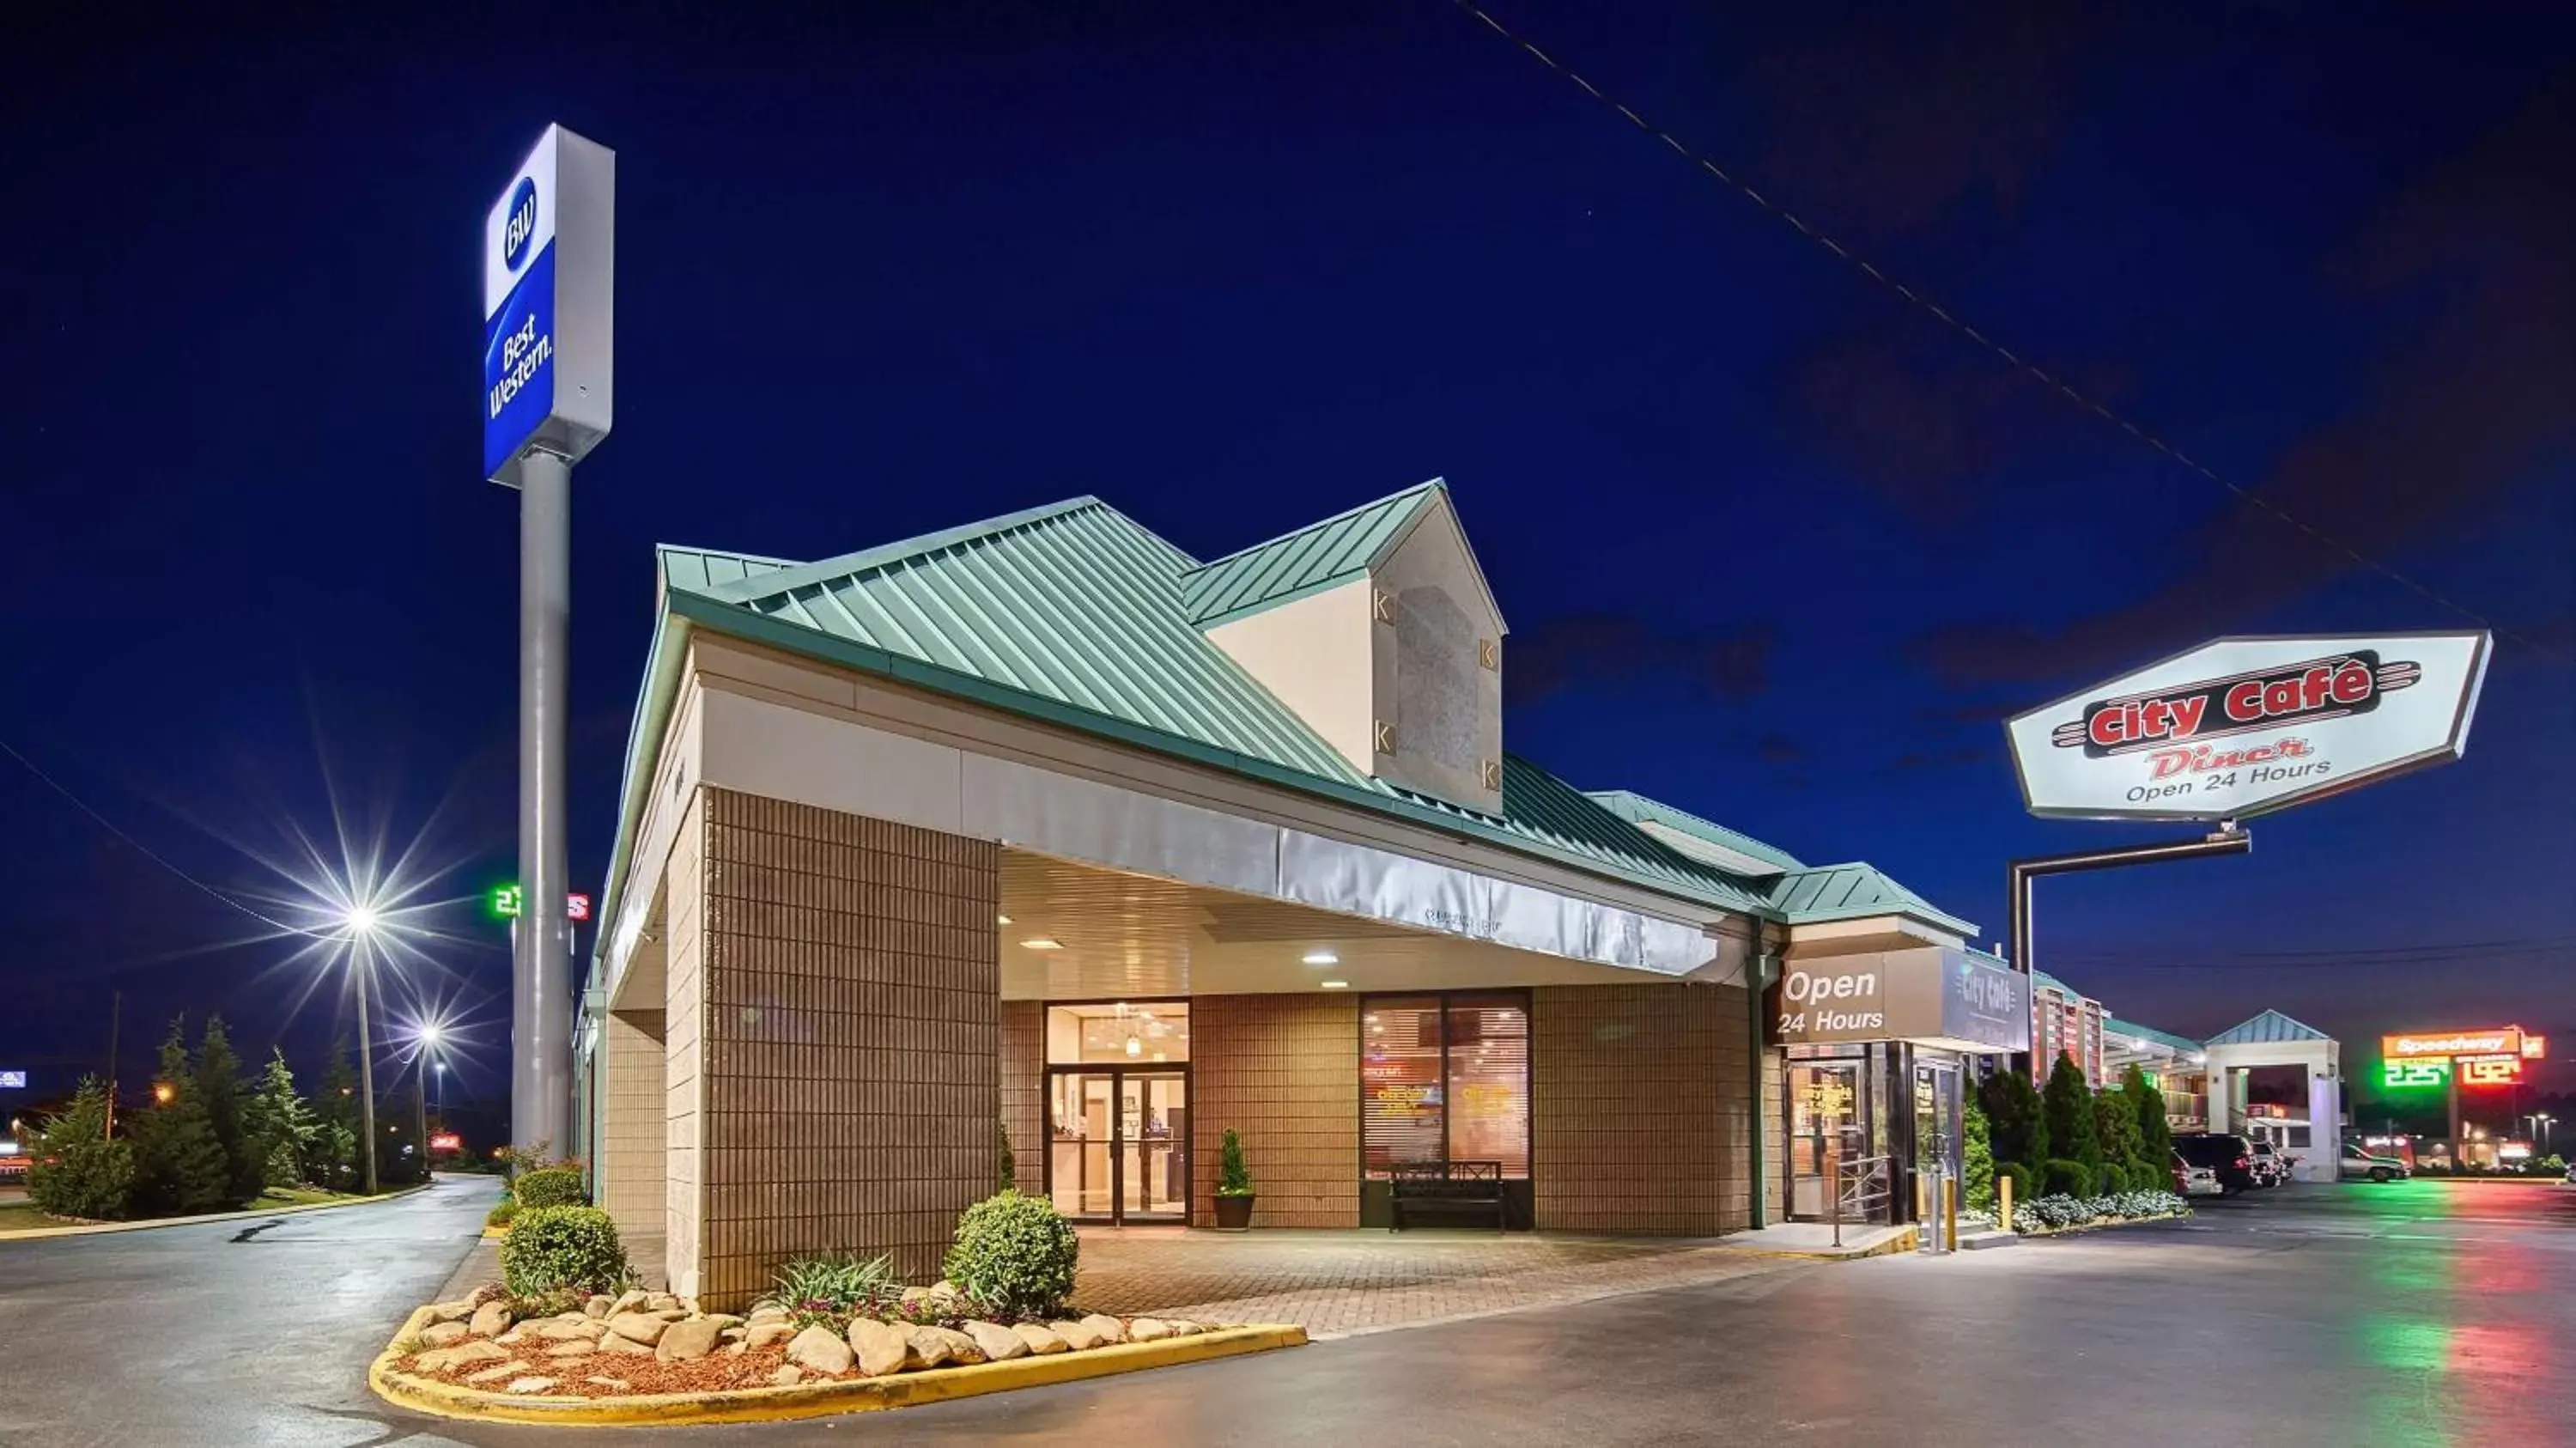 Property building in Best Western Heritage Inn - Chattanooga